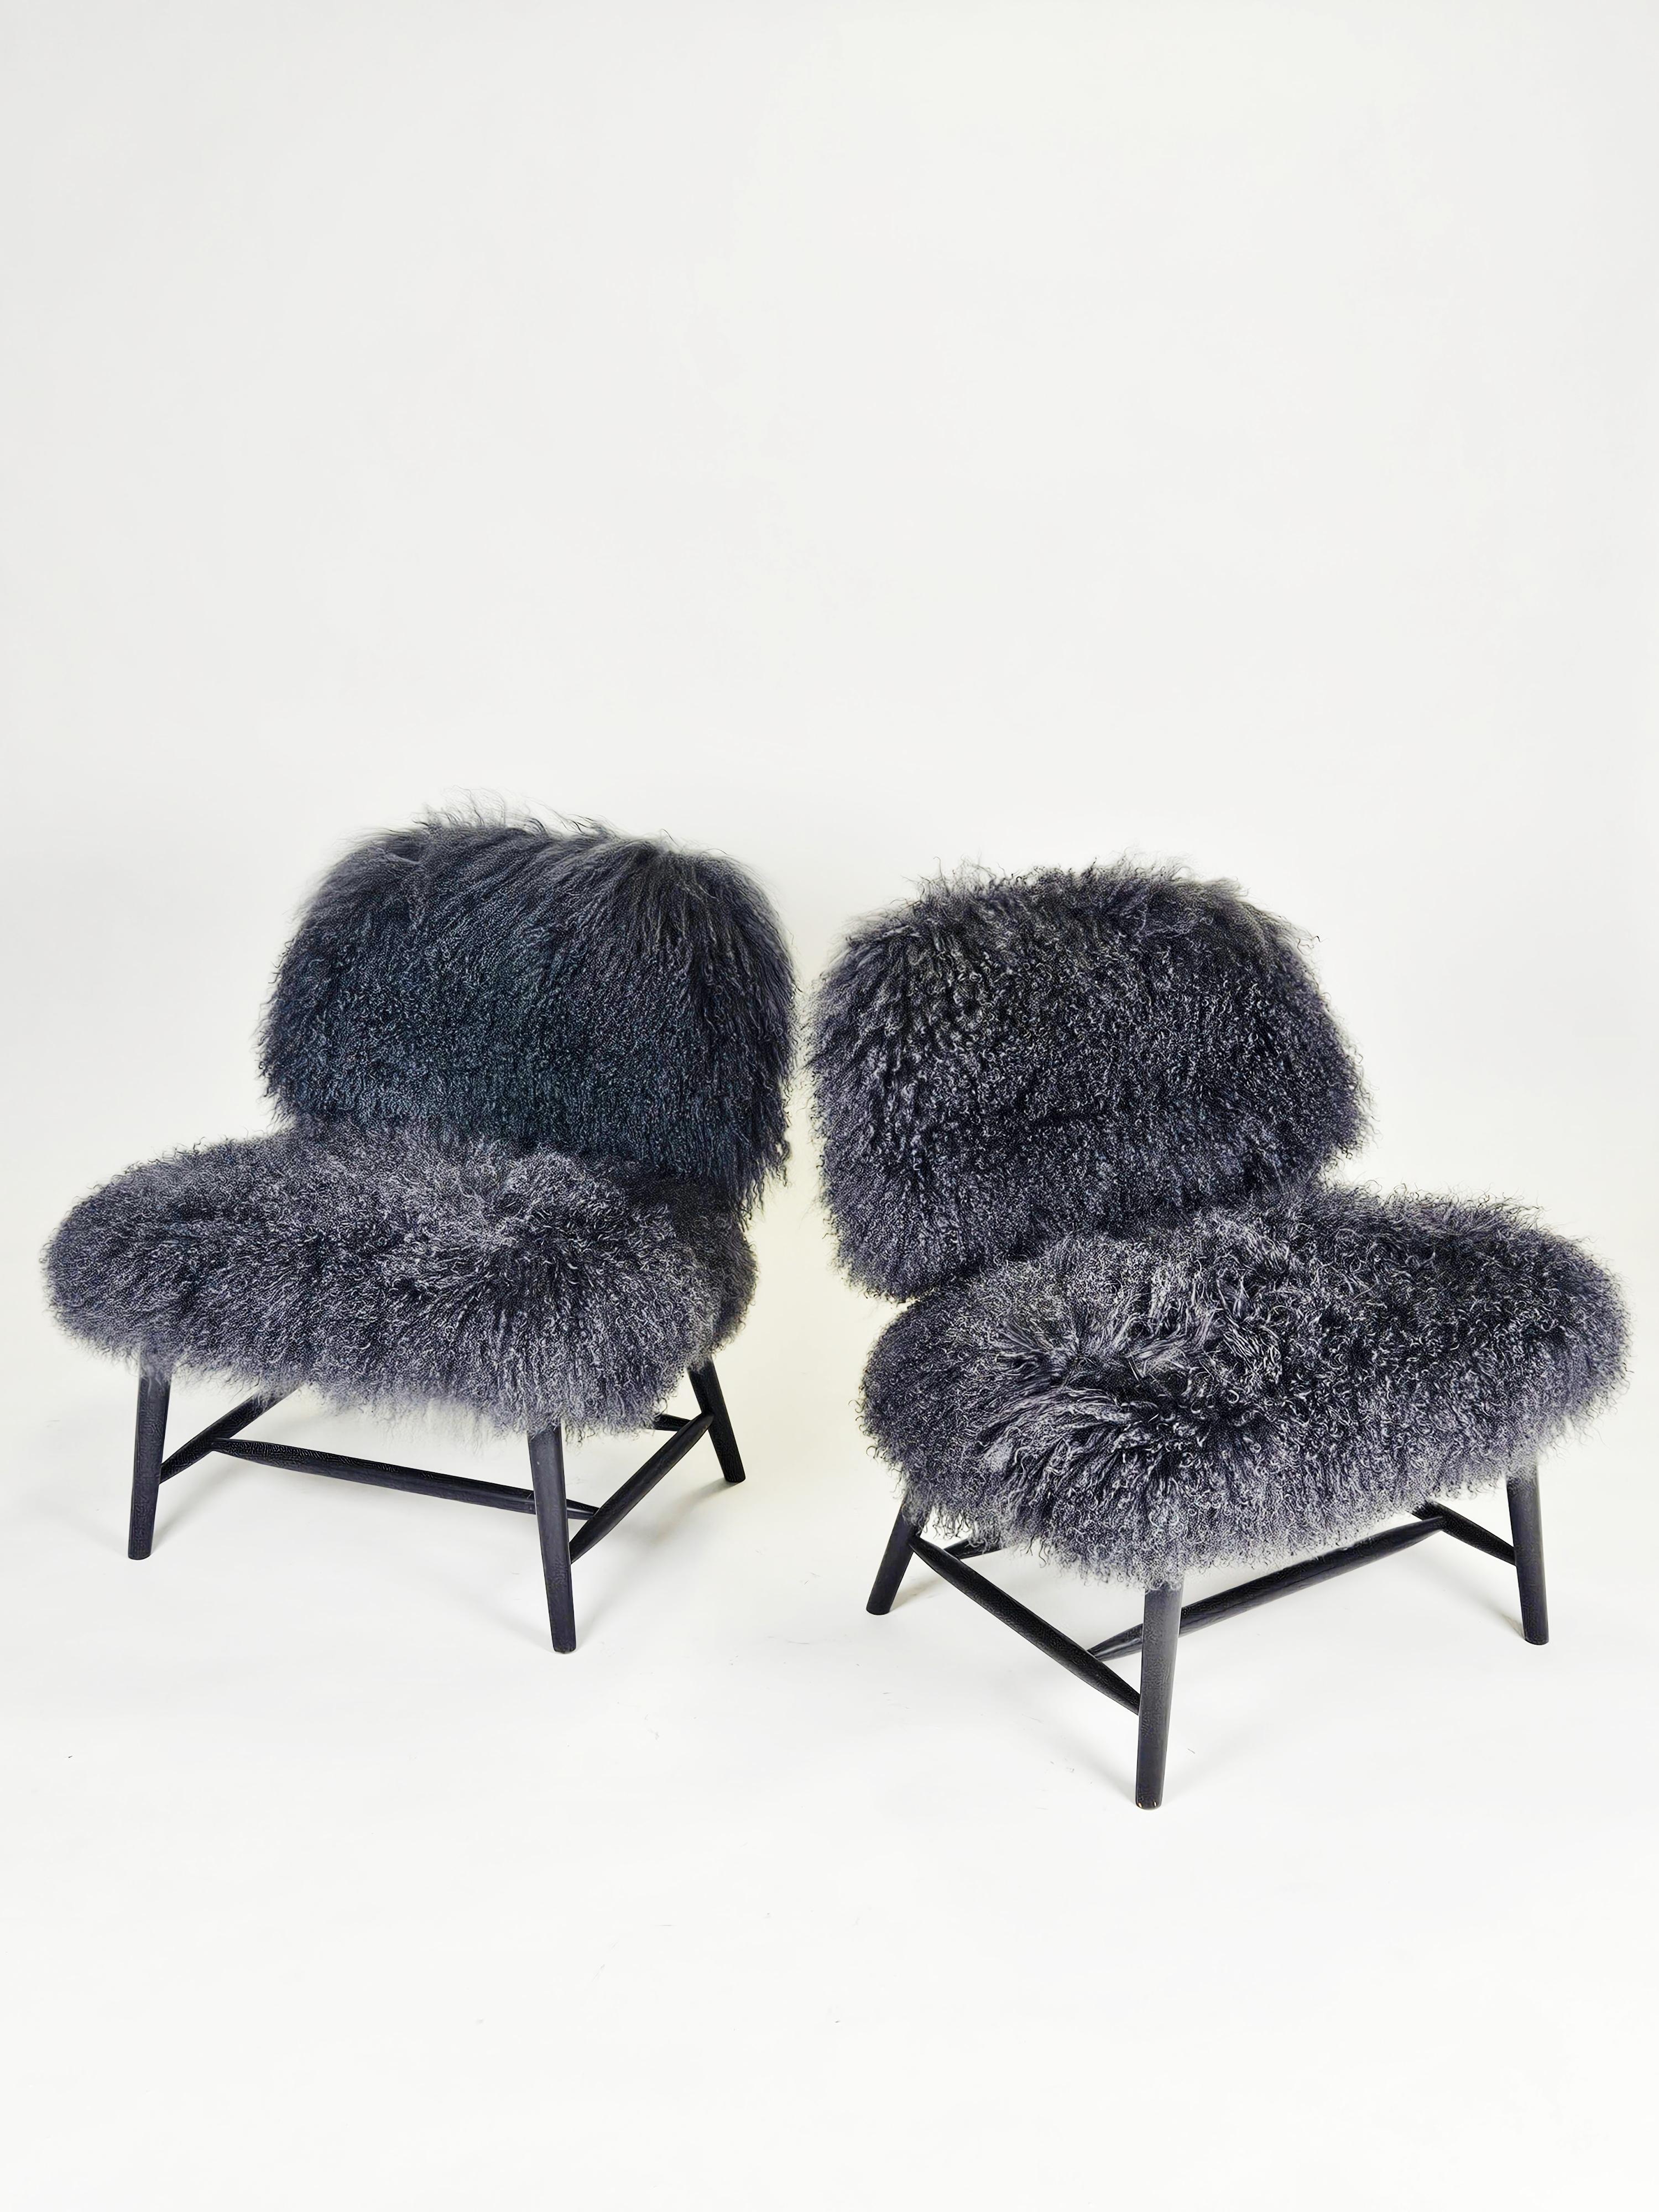 Pair of easy chairs designed by Alf Svensson for Bra Bohag, Ljungs Industrier, Sweden, during the 1950s. 

Model is called 'Teve'.

Body in beach lacquered black and upholstered in charcoal sheepskin. 